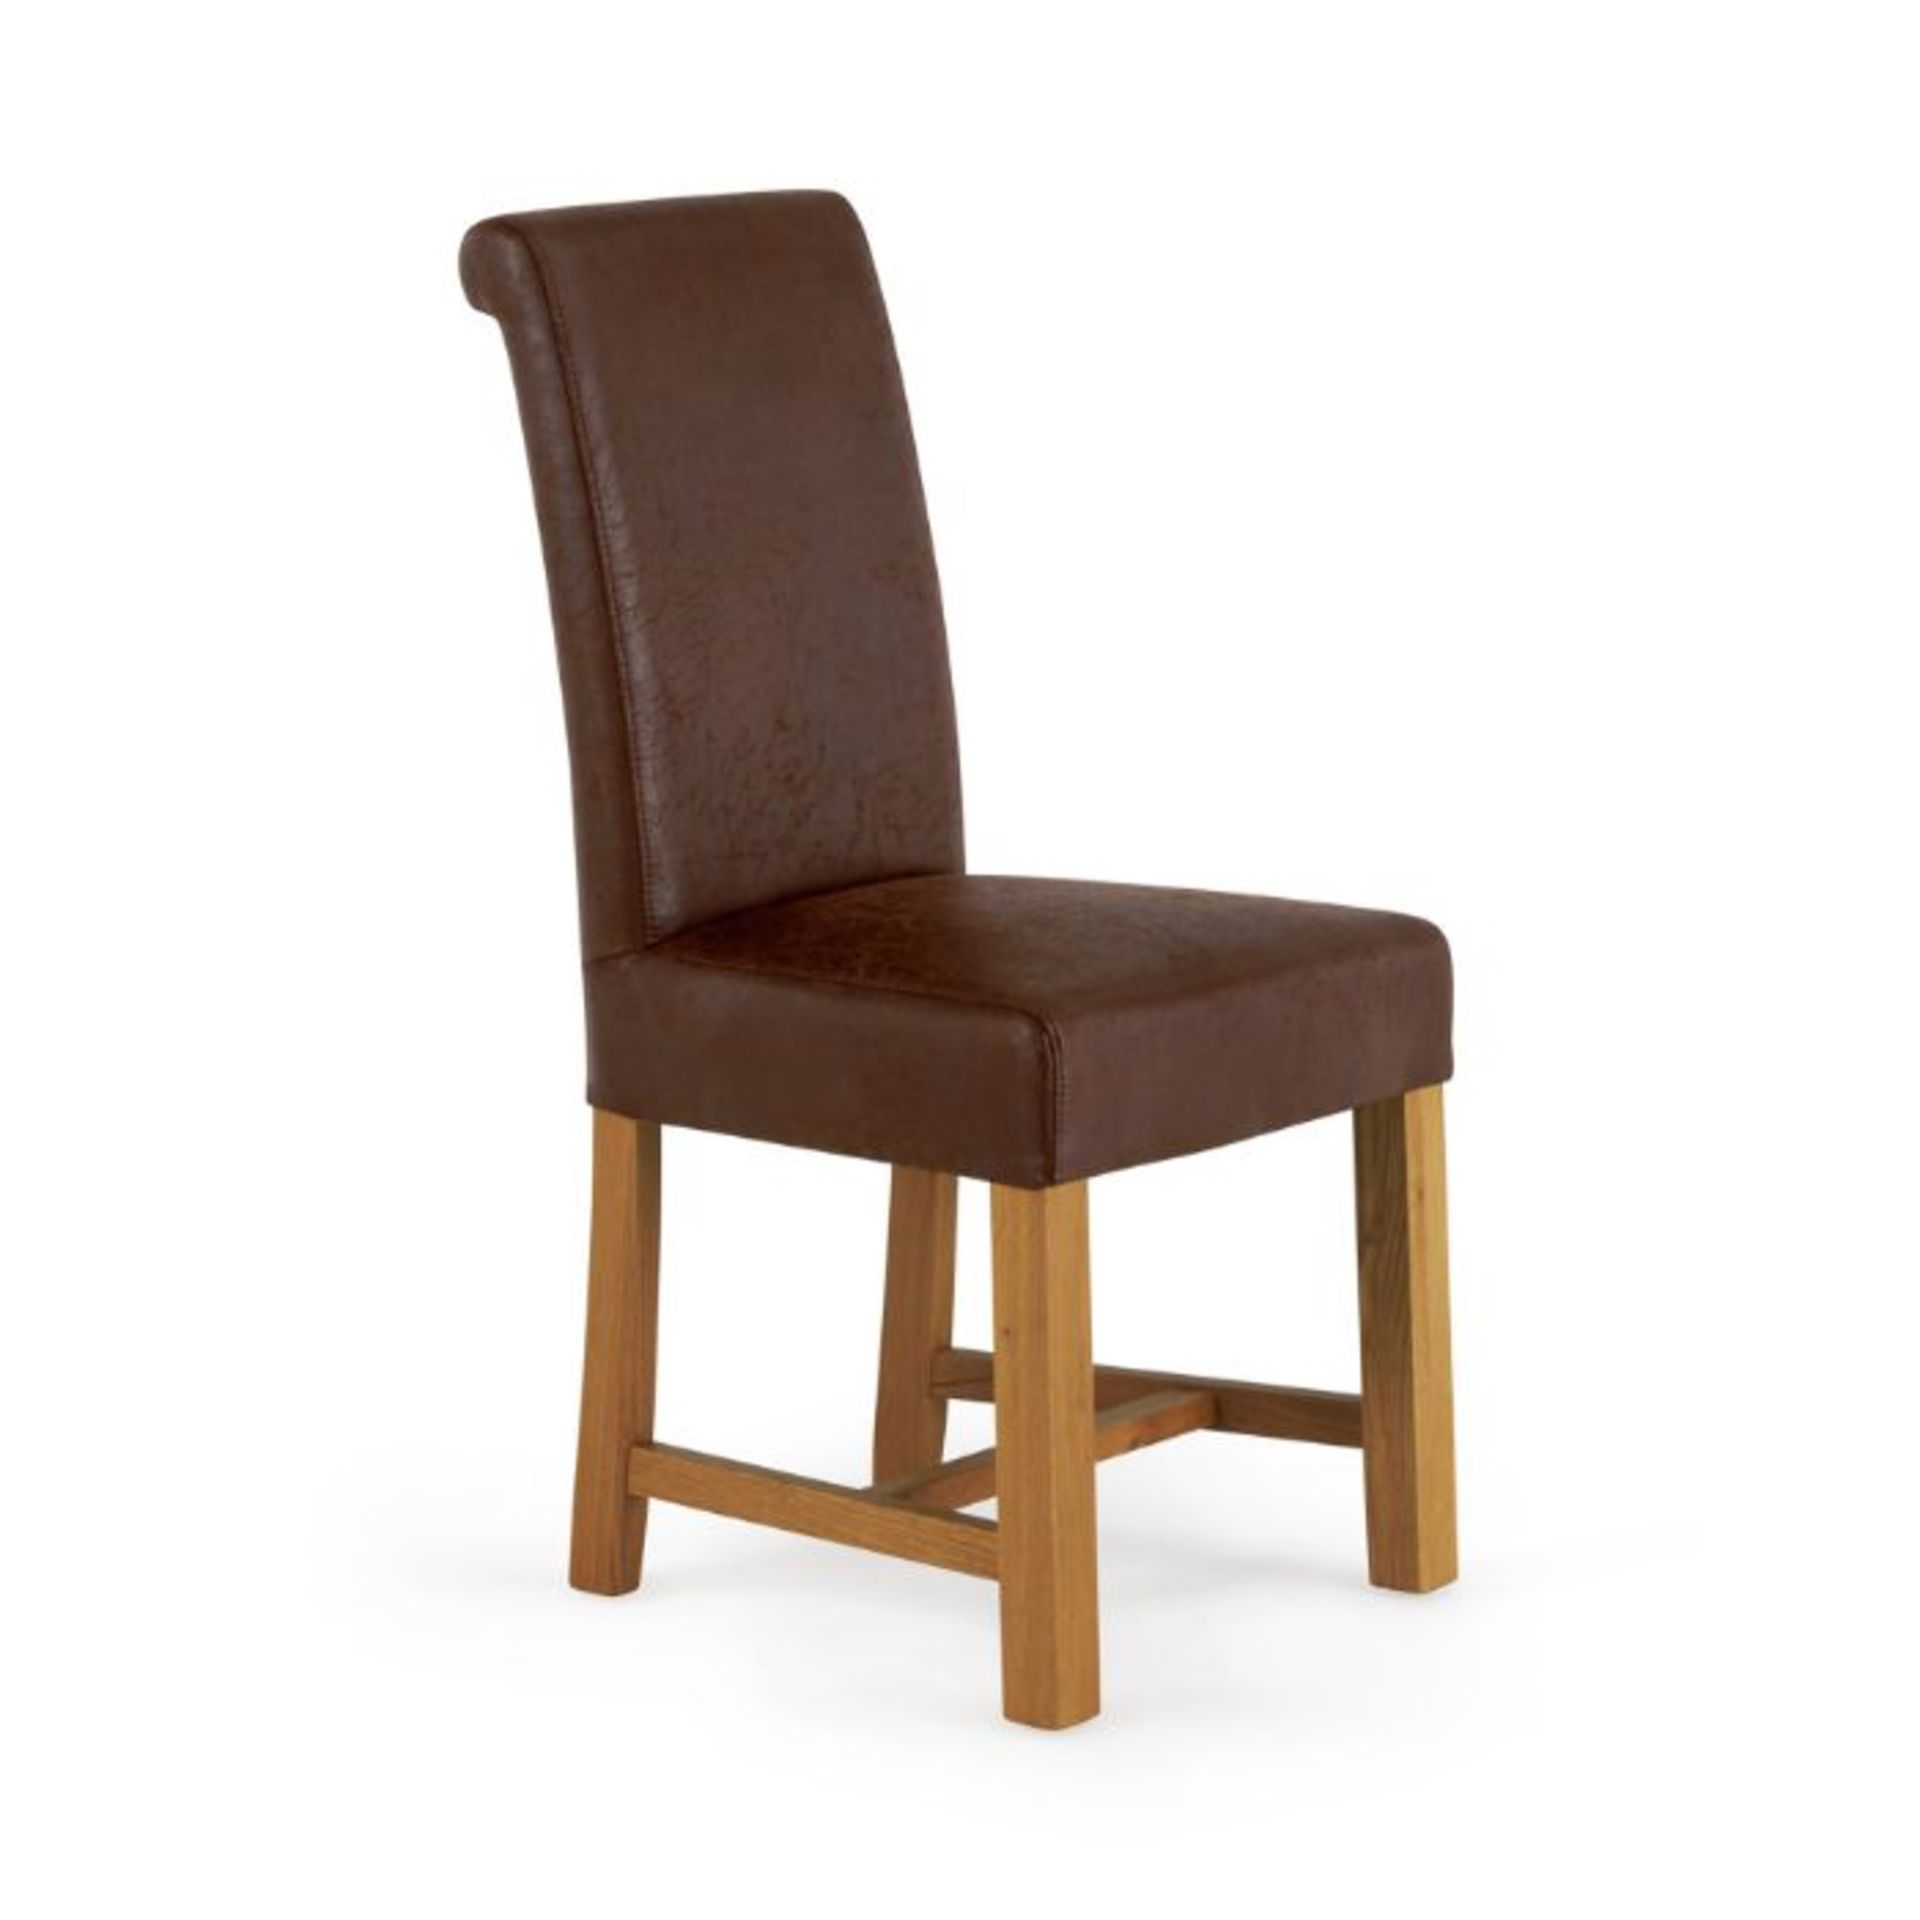 Oak Furnitureland Scroll Back Chair in Antiqued Brown Fabric with Solid Oak Legs RRP ?380.00 This - Image 3 of 3